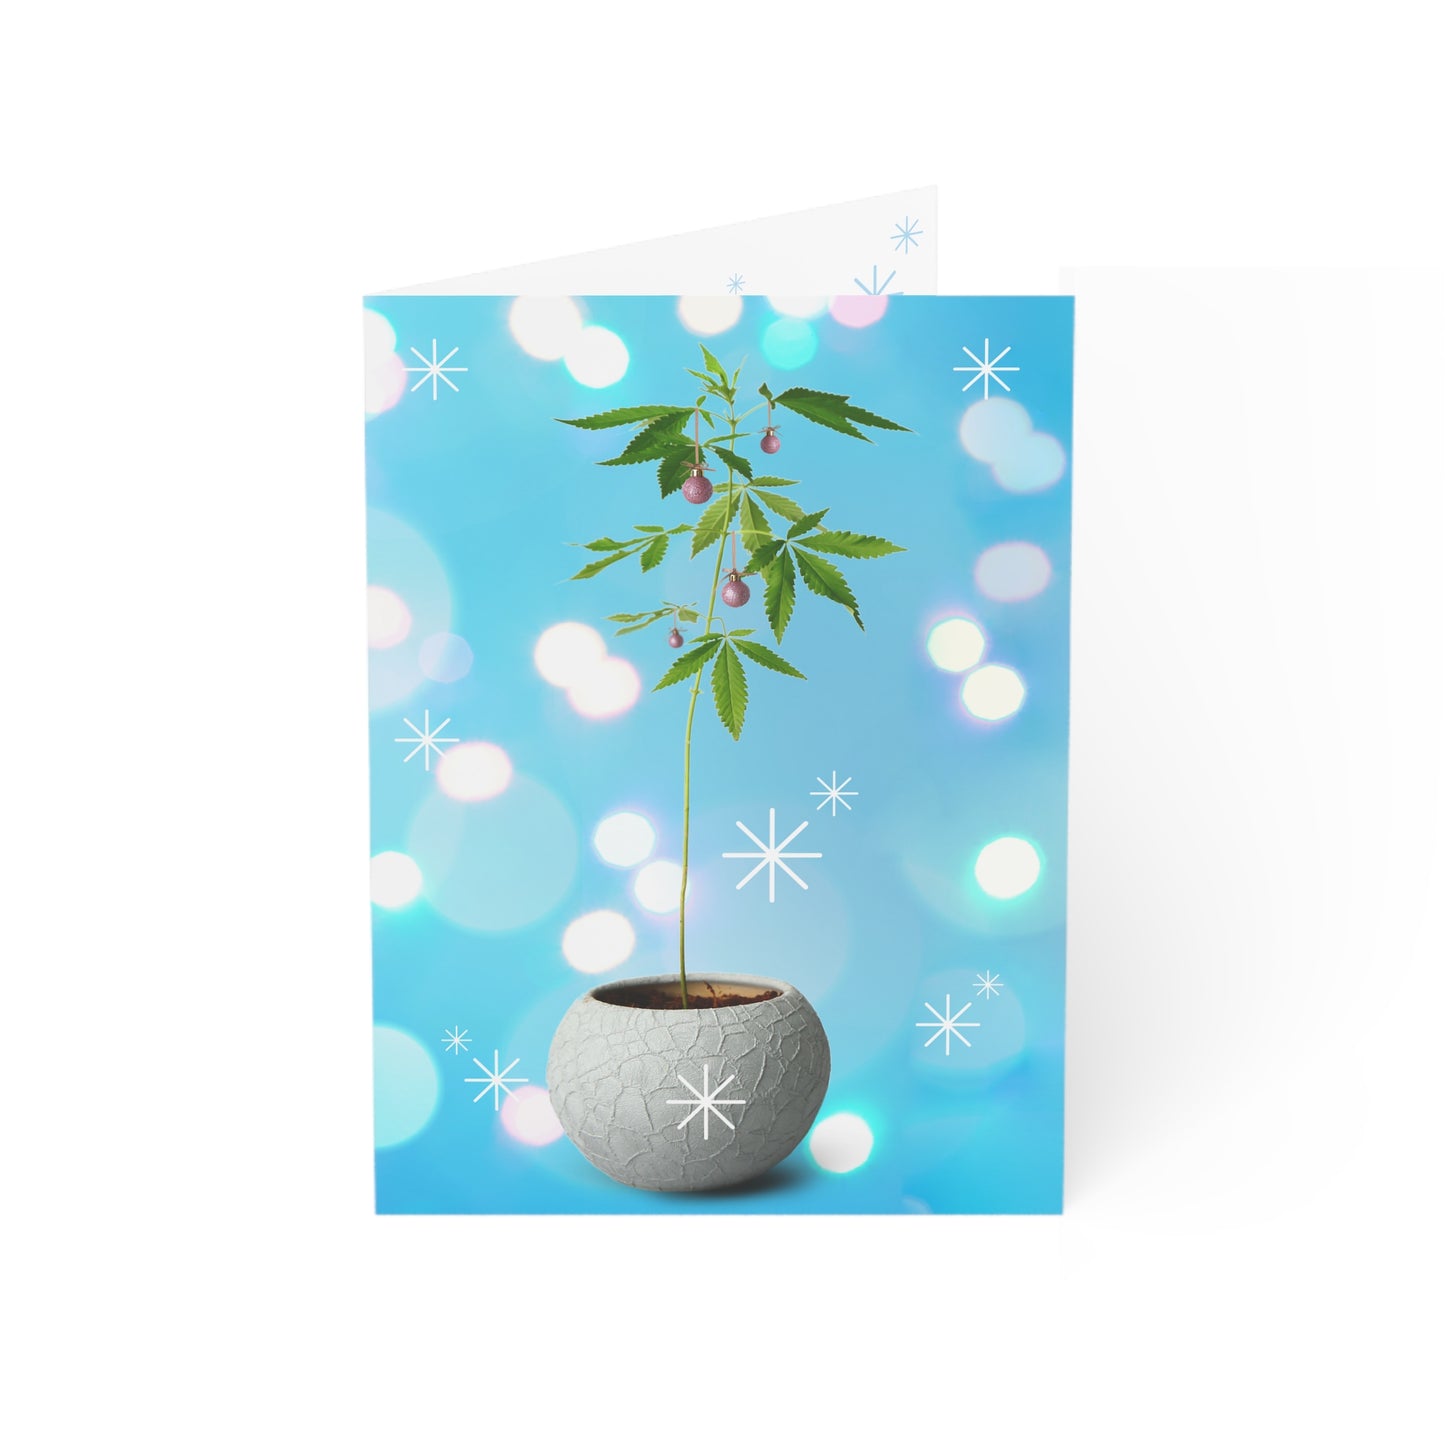 Potted Christmas Marijuana Plant Merry Christmas Greeting Cards (1, 10, 30, and 50pcs)